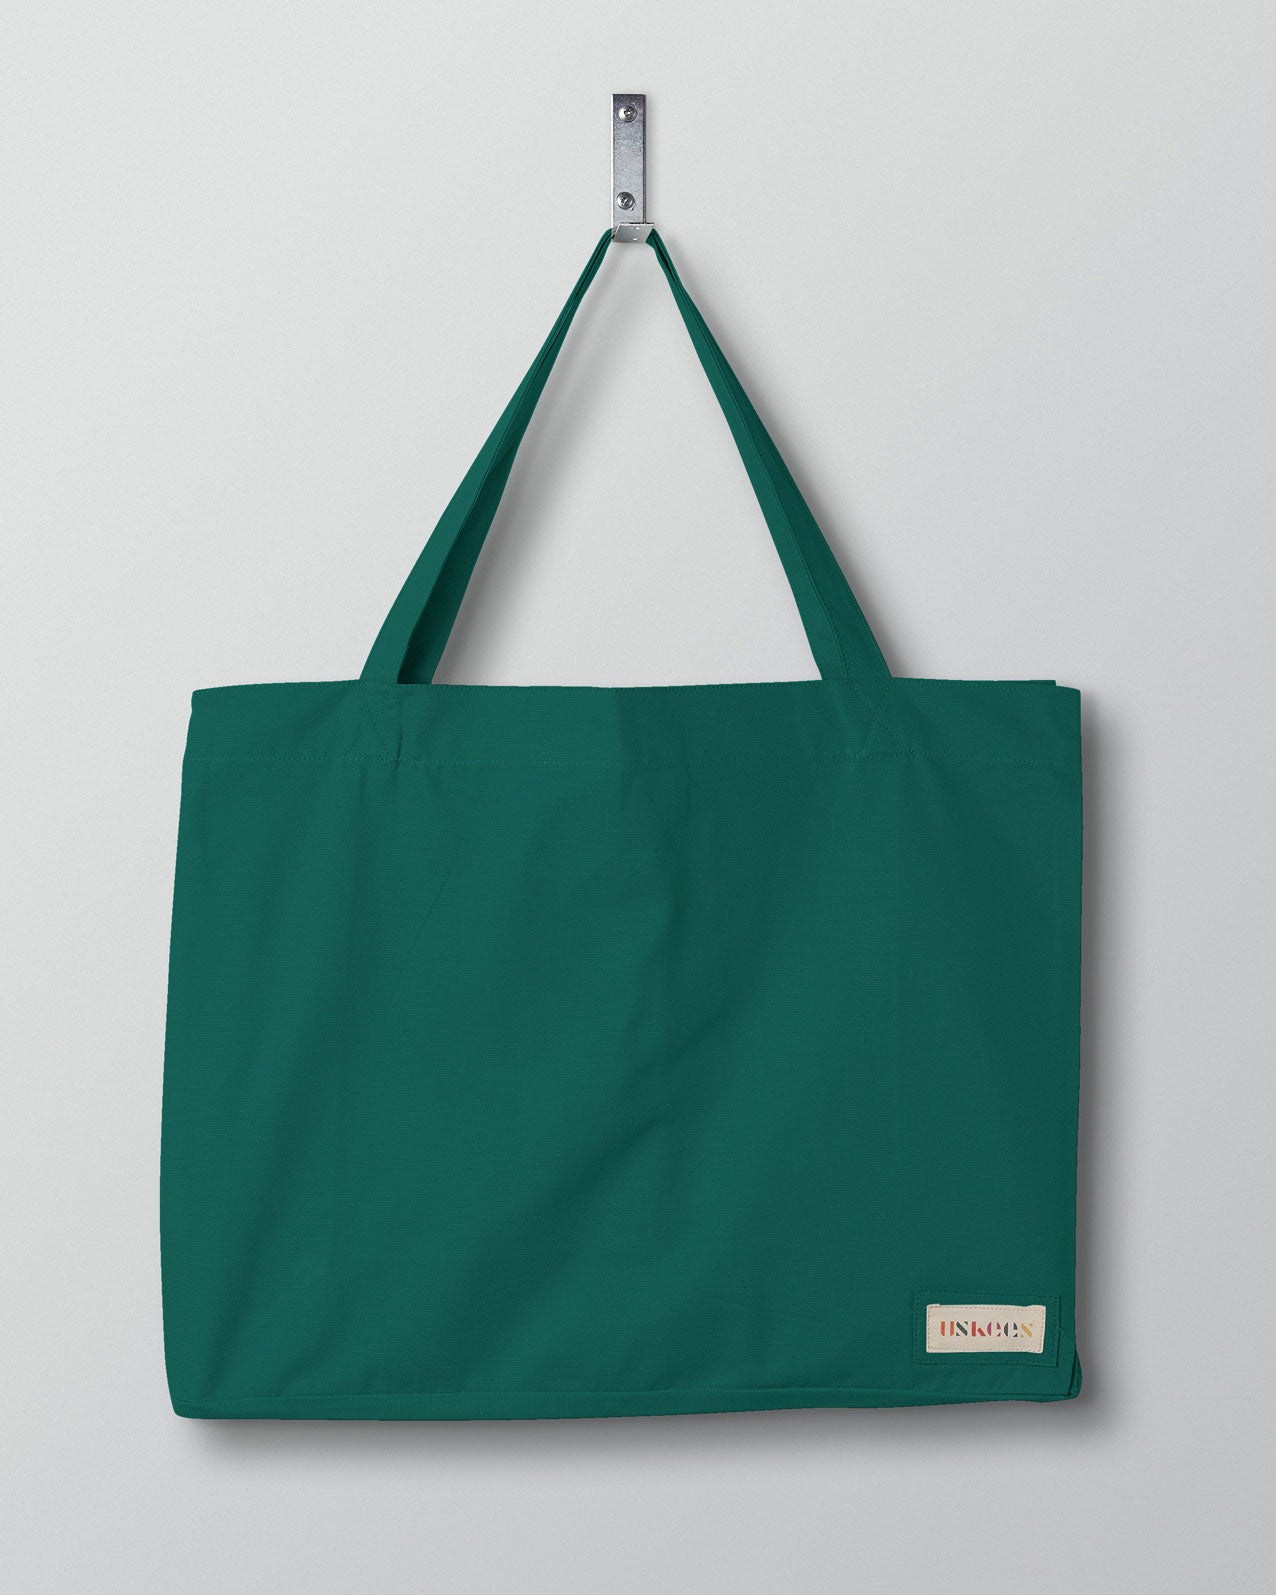 Full front hanging shot of Uskees #4001 large foam-green tote bag, showing double handles and Uskees woven logo.